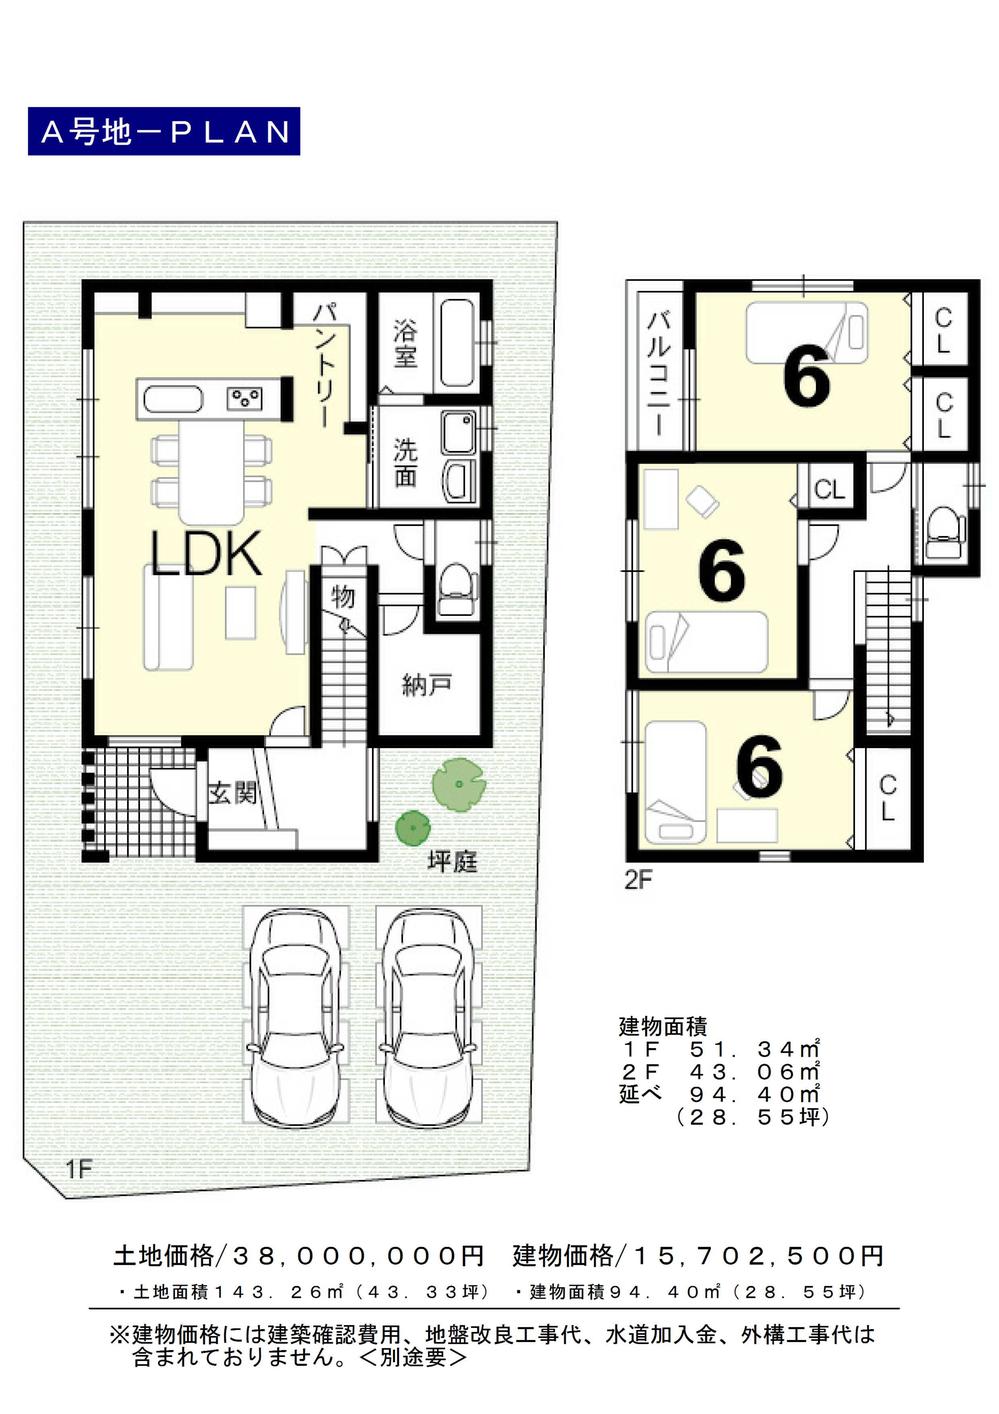 Other building plan example. Building plan example (A No. land) Building price 15.7 million yen, Building area 94.40 sq m